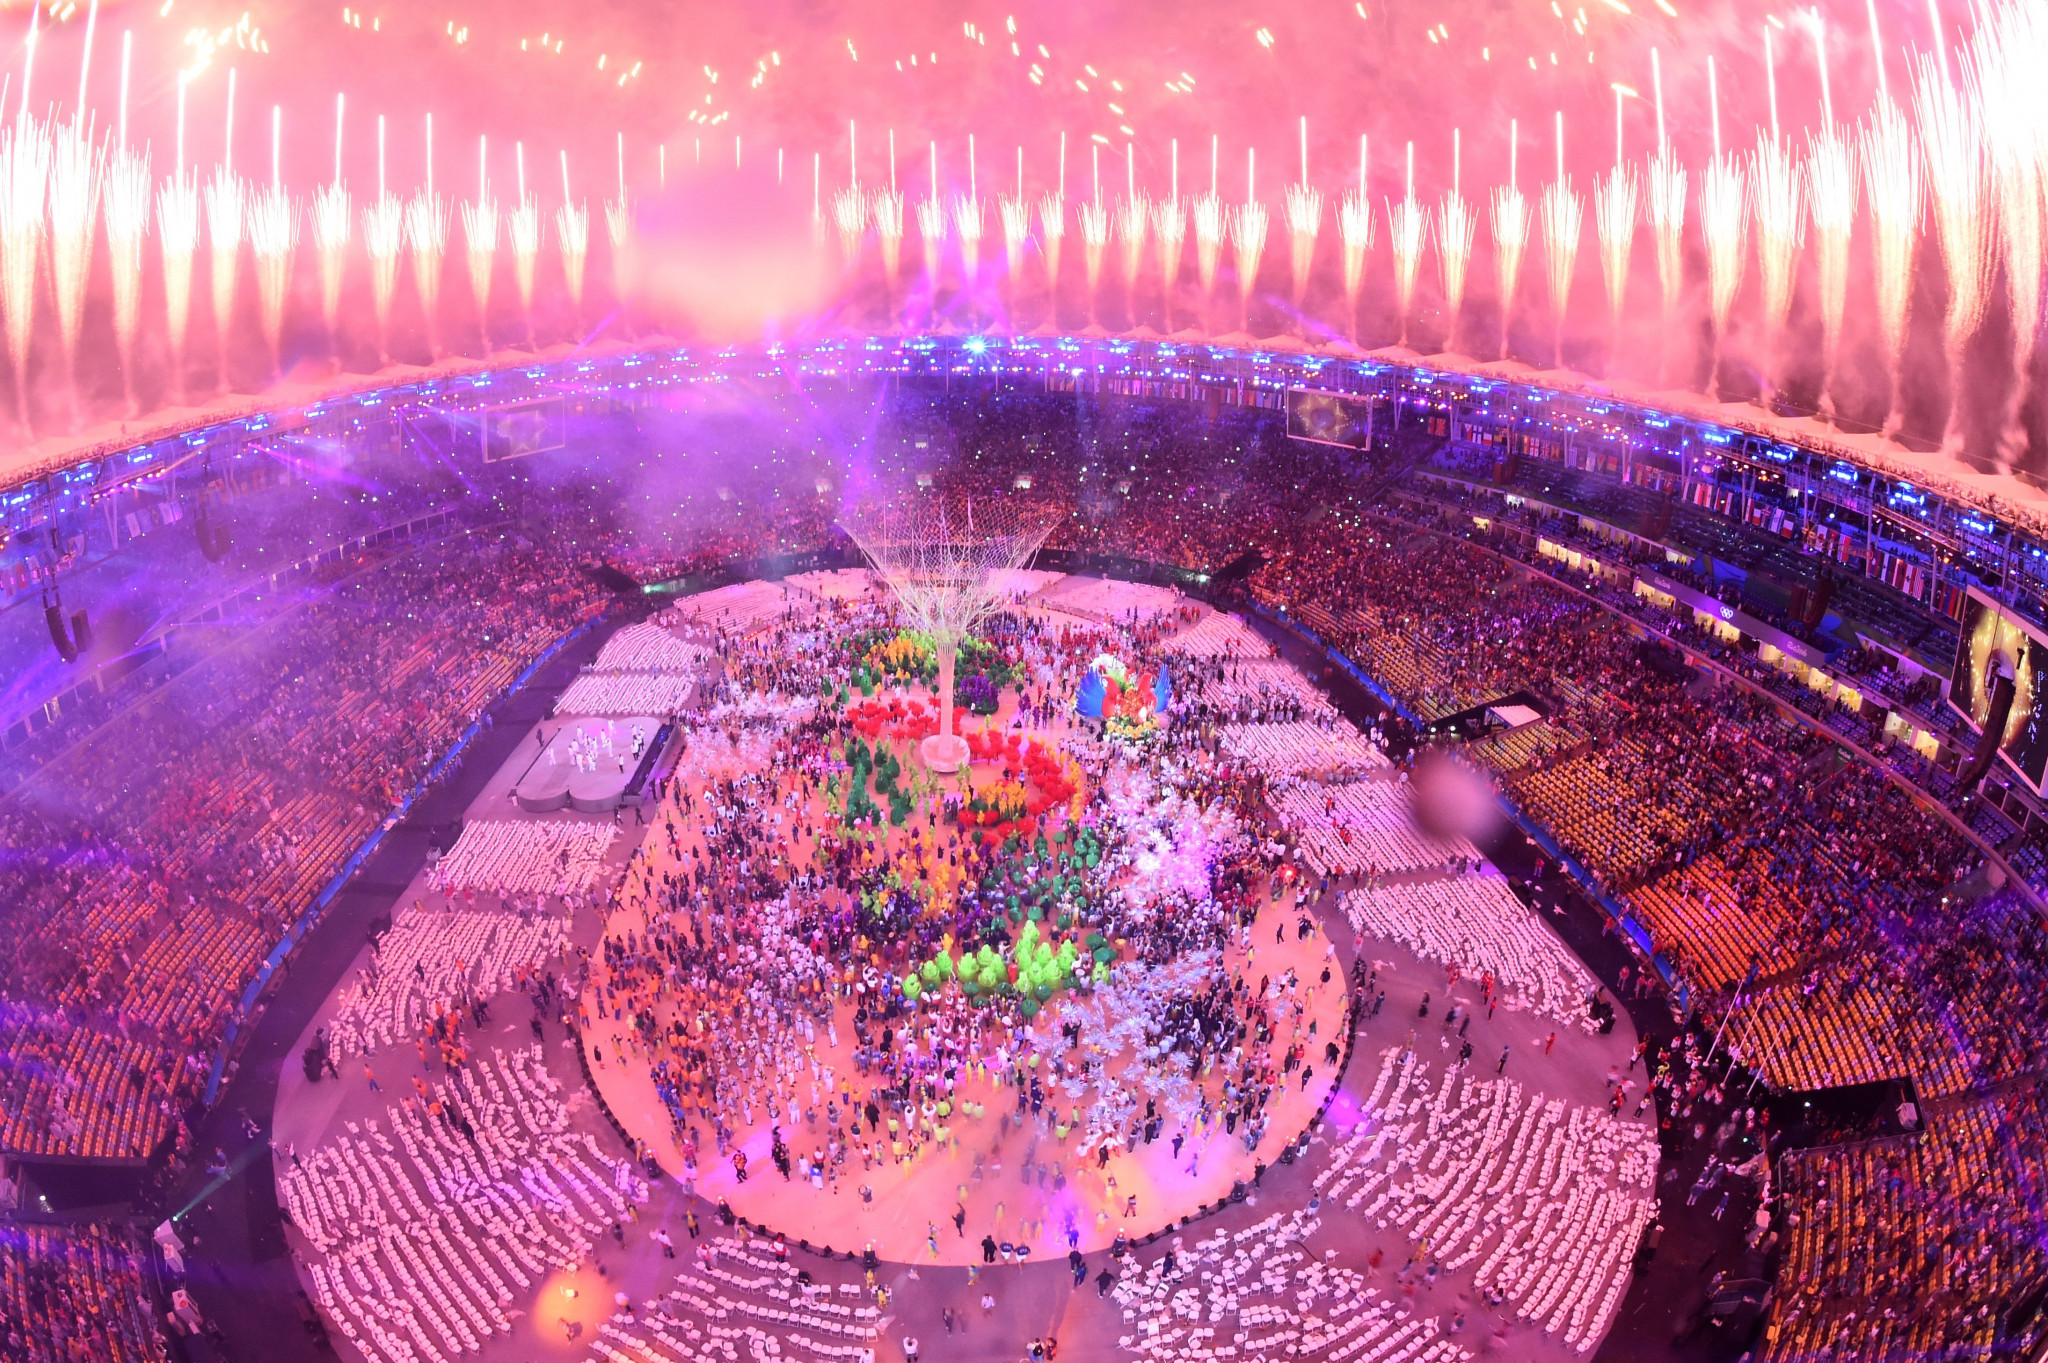 New independent study claims Rio 2016 Olympic Games provided significant economic benefit to host city